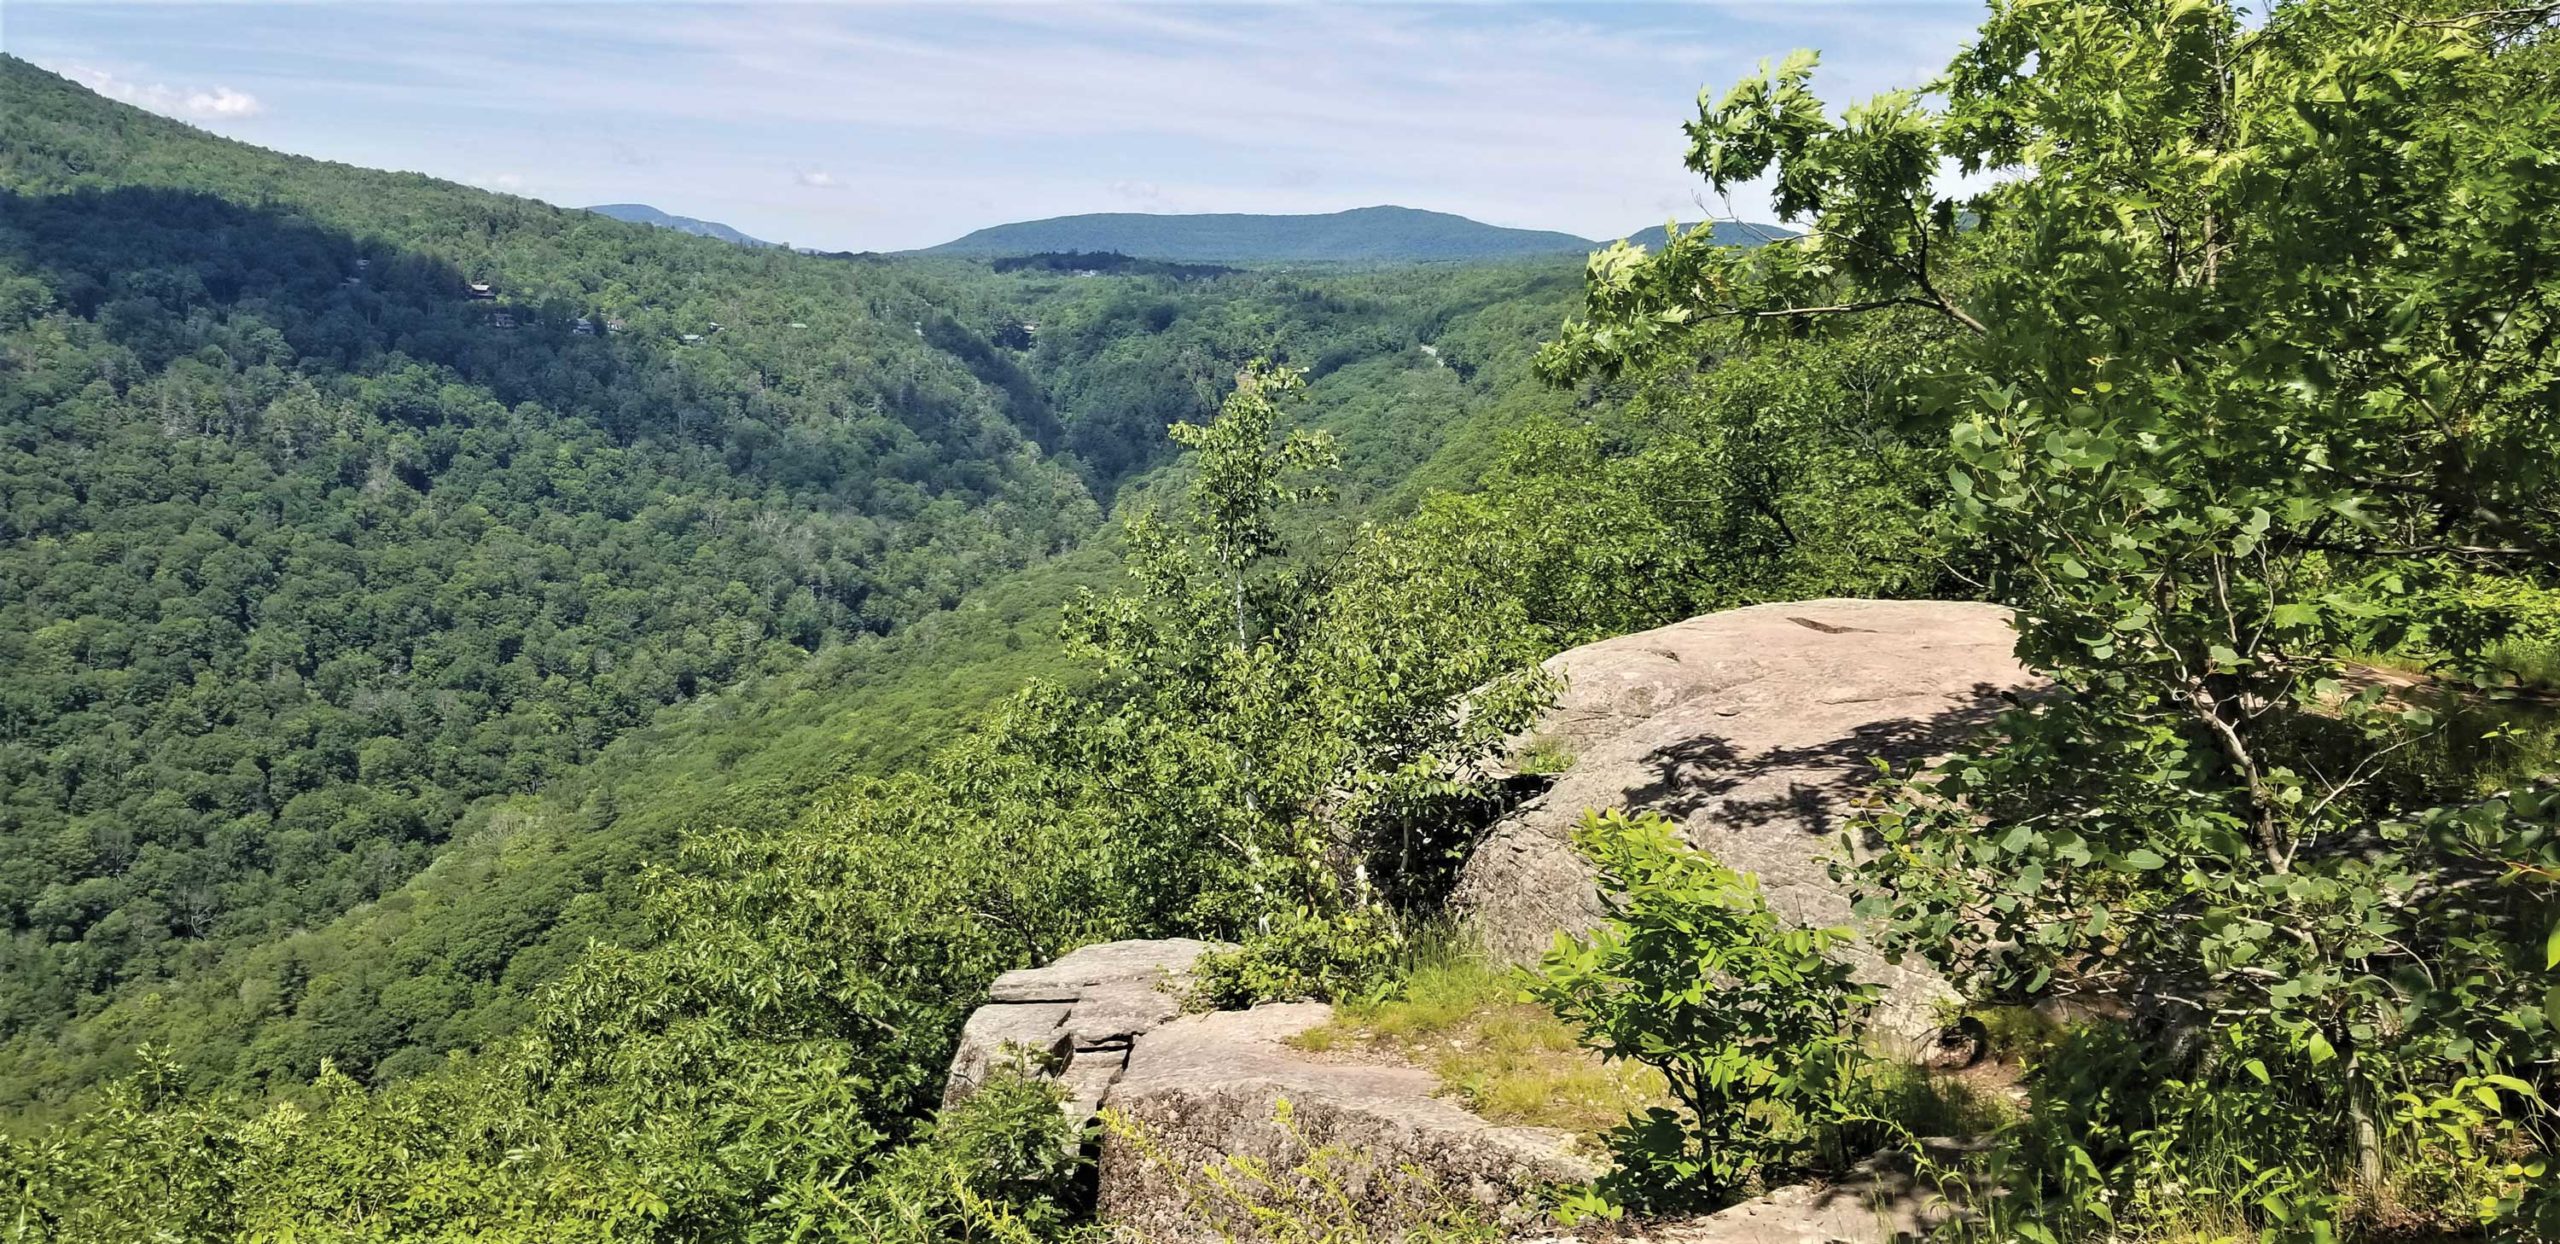 Fig. 10: Inspiration Point, looking west in Kaaterskill Clove